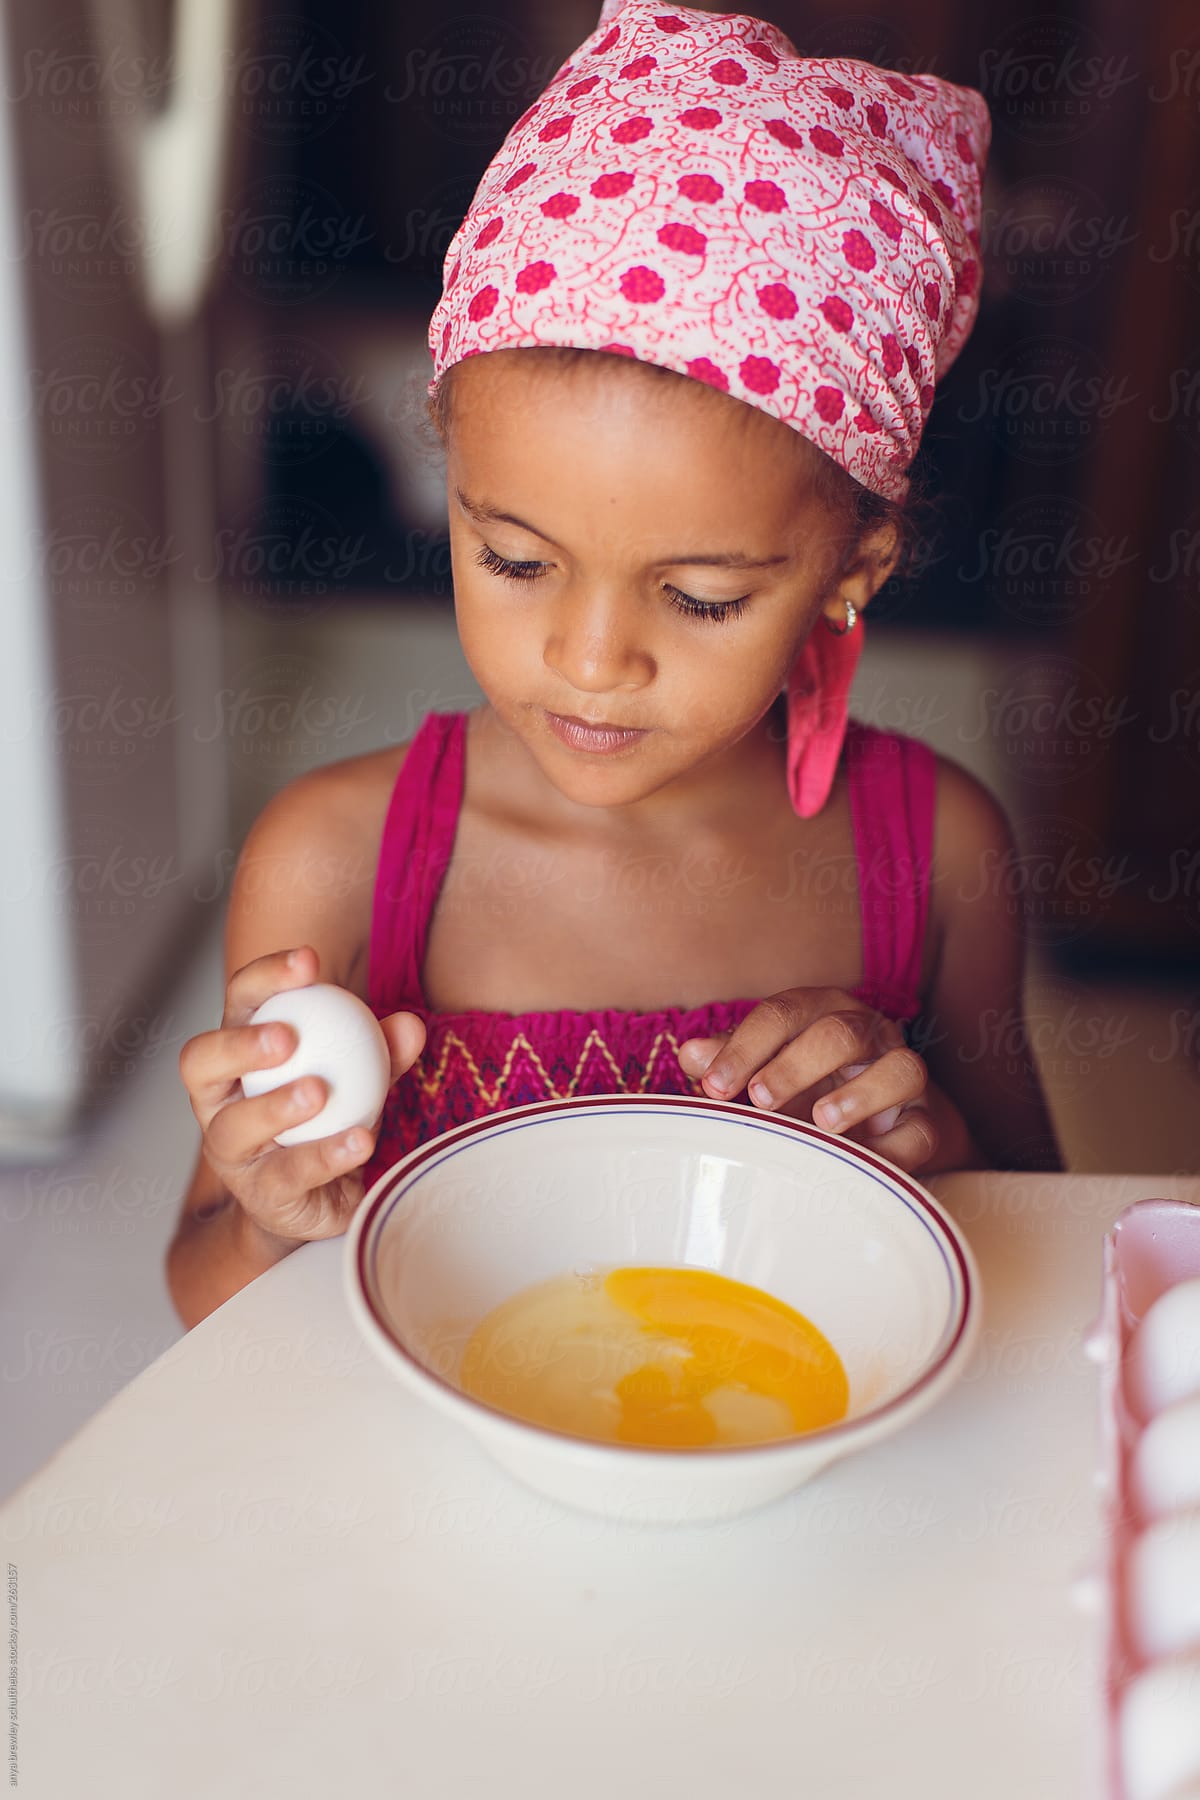 Young child cracking eggs into a bowl